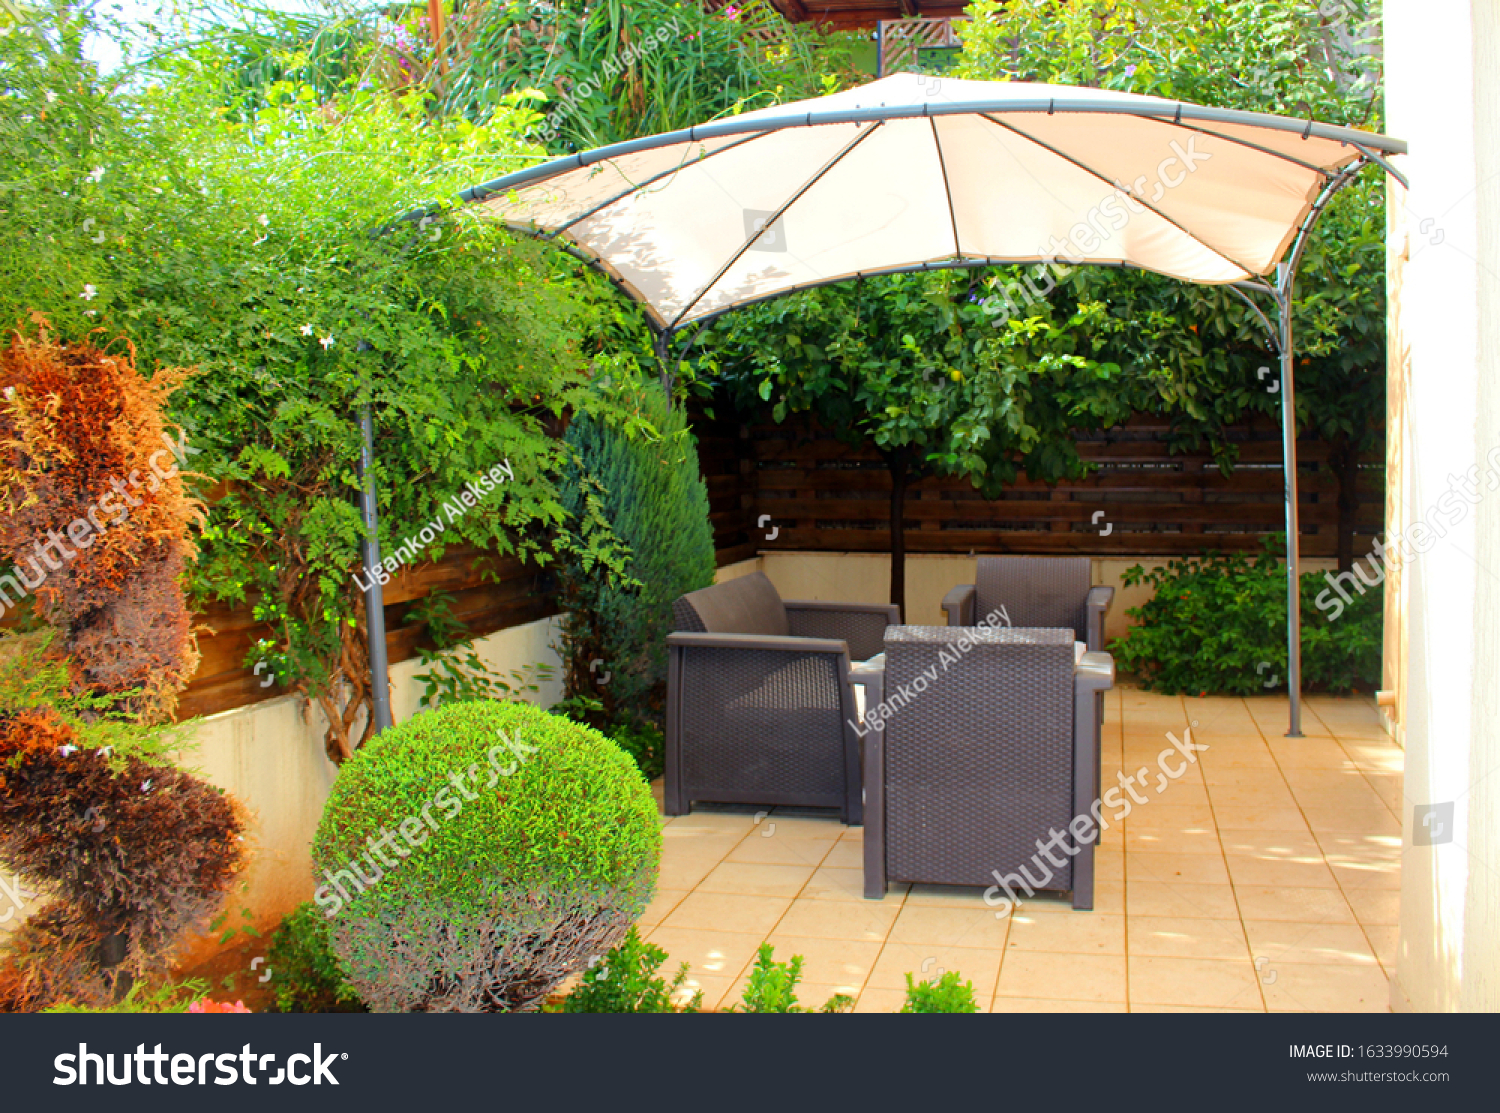 View of a summer holiday destination with armchairs and a parasol #1633990594